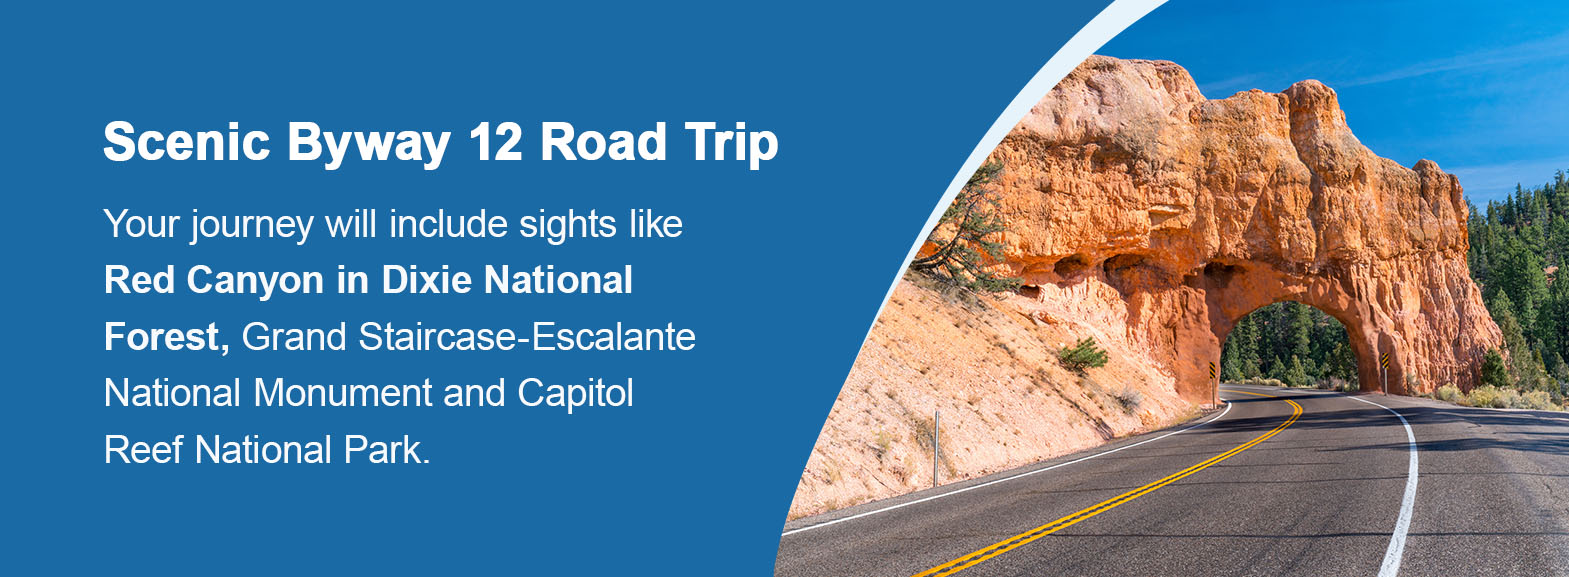 Scenic Byway 12 Road Trip. Your journey will include sights like Red Canyon in Dixie National Forest, Grand Staircase-Escalante National Monument and Capitol Reef National Park. 